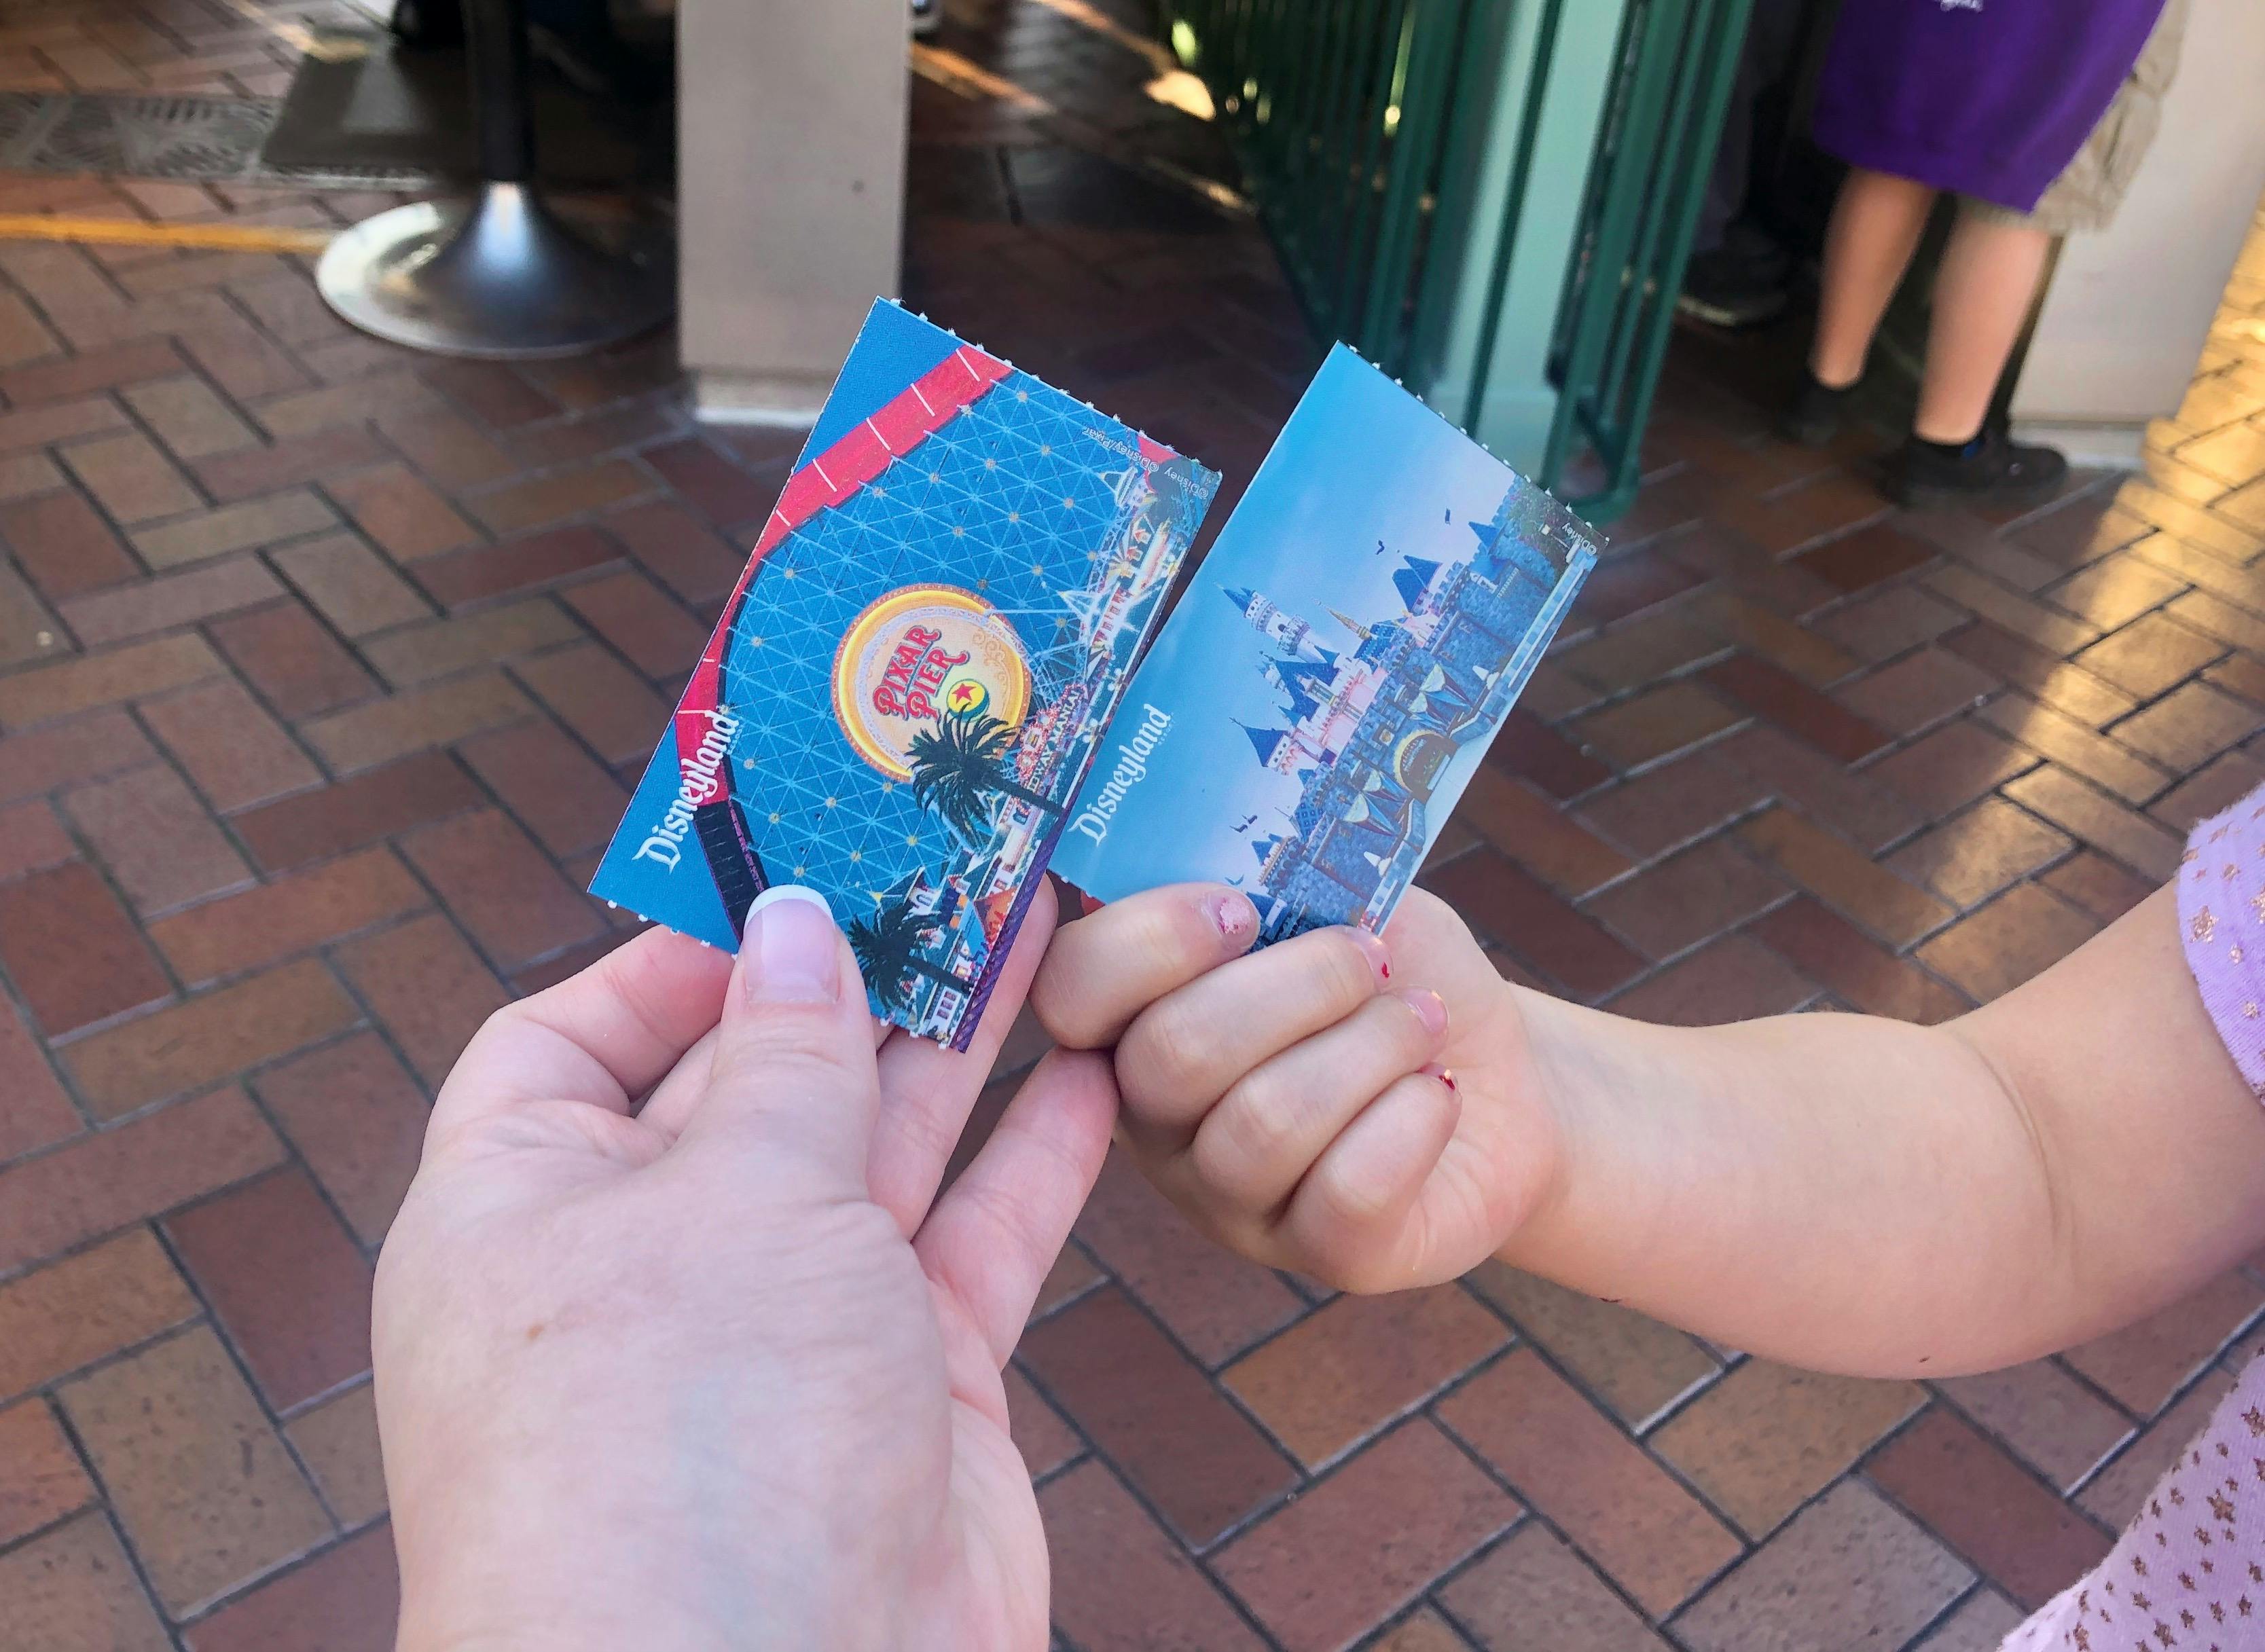 A mother and child hold up their tickets at Disneyland.